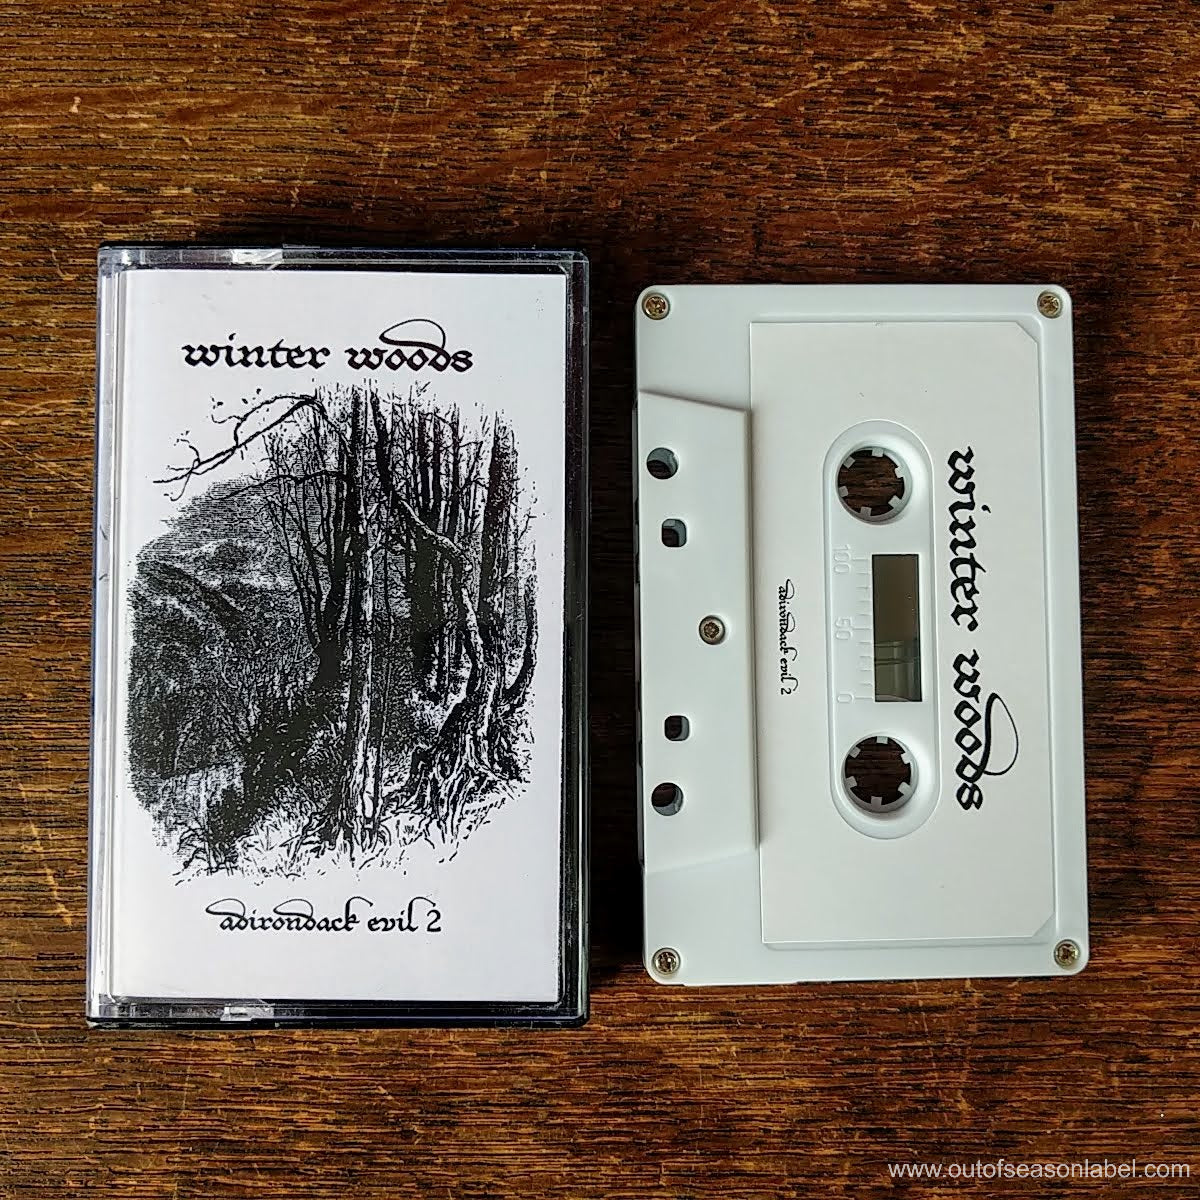 [SOLD OUT] WINTER WOODS "Adirondack Evil 2" Cassette Tape